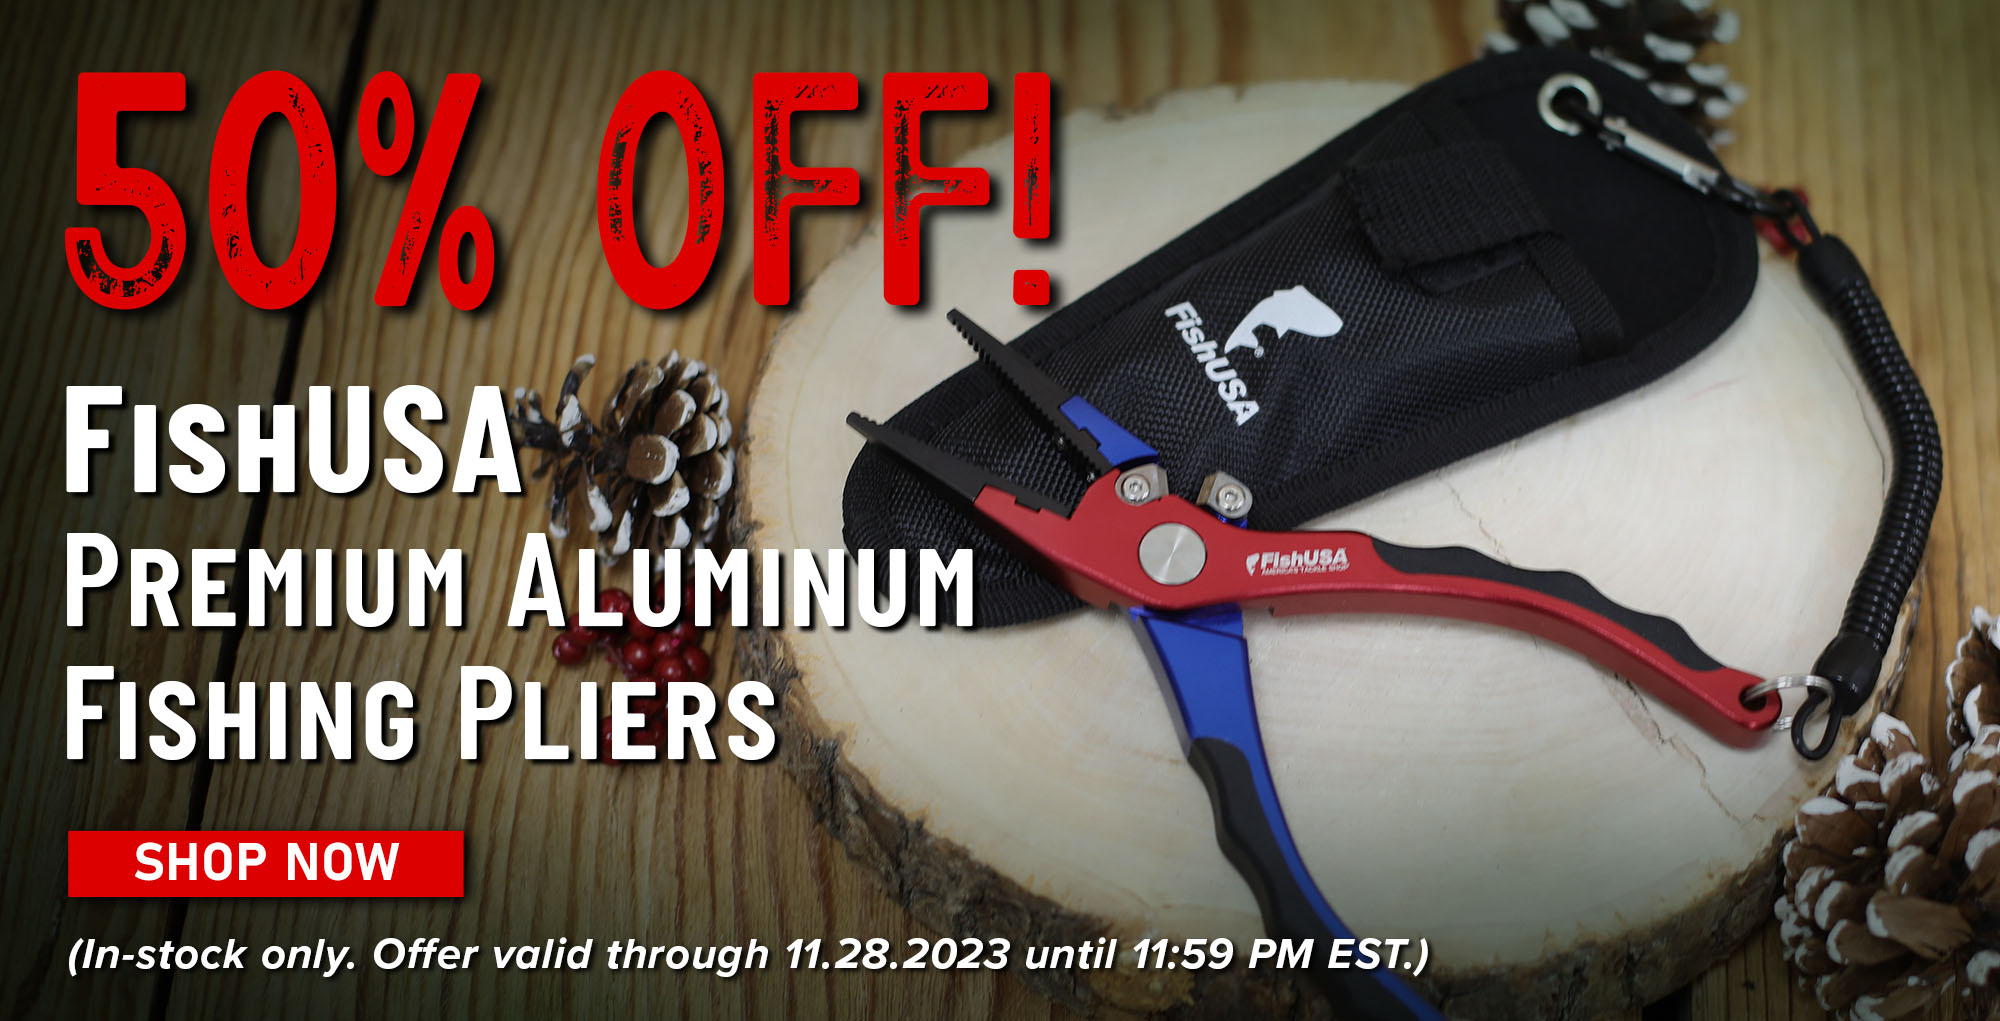 50% Off! FishUSA Premium Aluminum Fishing Pliers Shop Now (In-stock only. Offer valid through 11.28.2023 until 11:59 PM EST.)